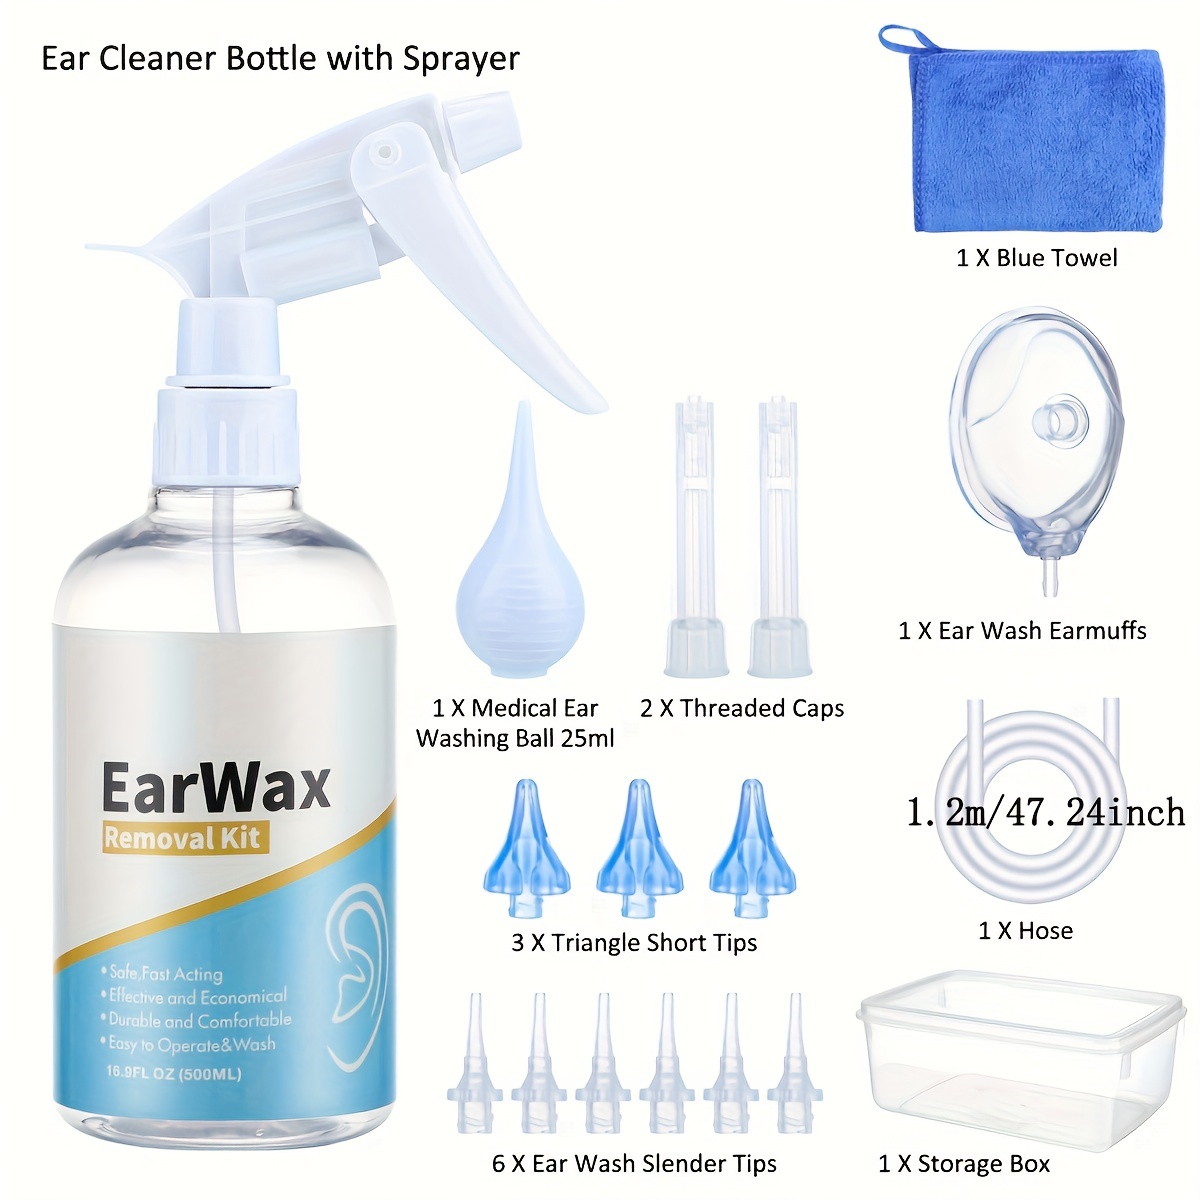 Wax Away® Earwax Removal System